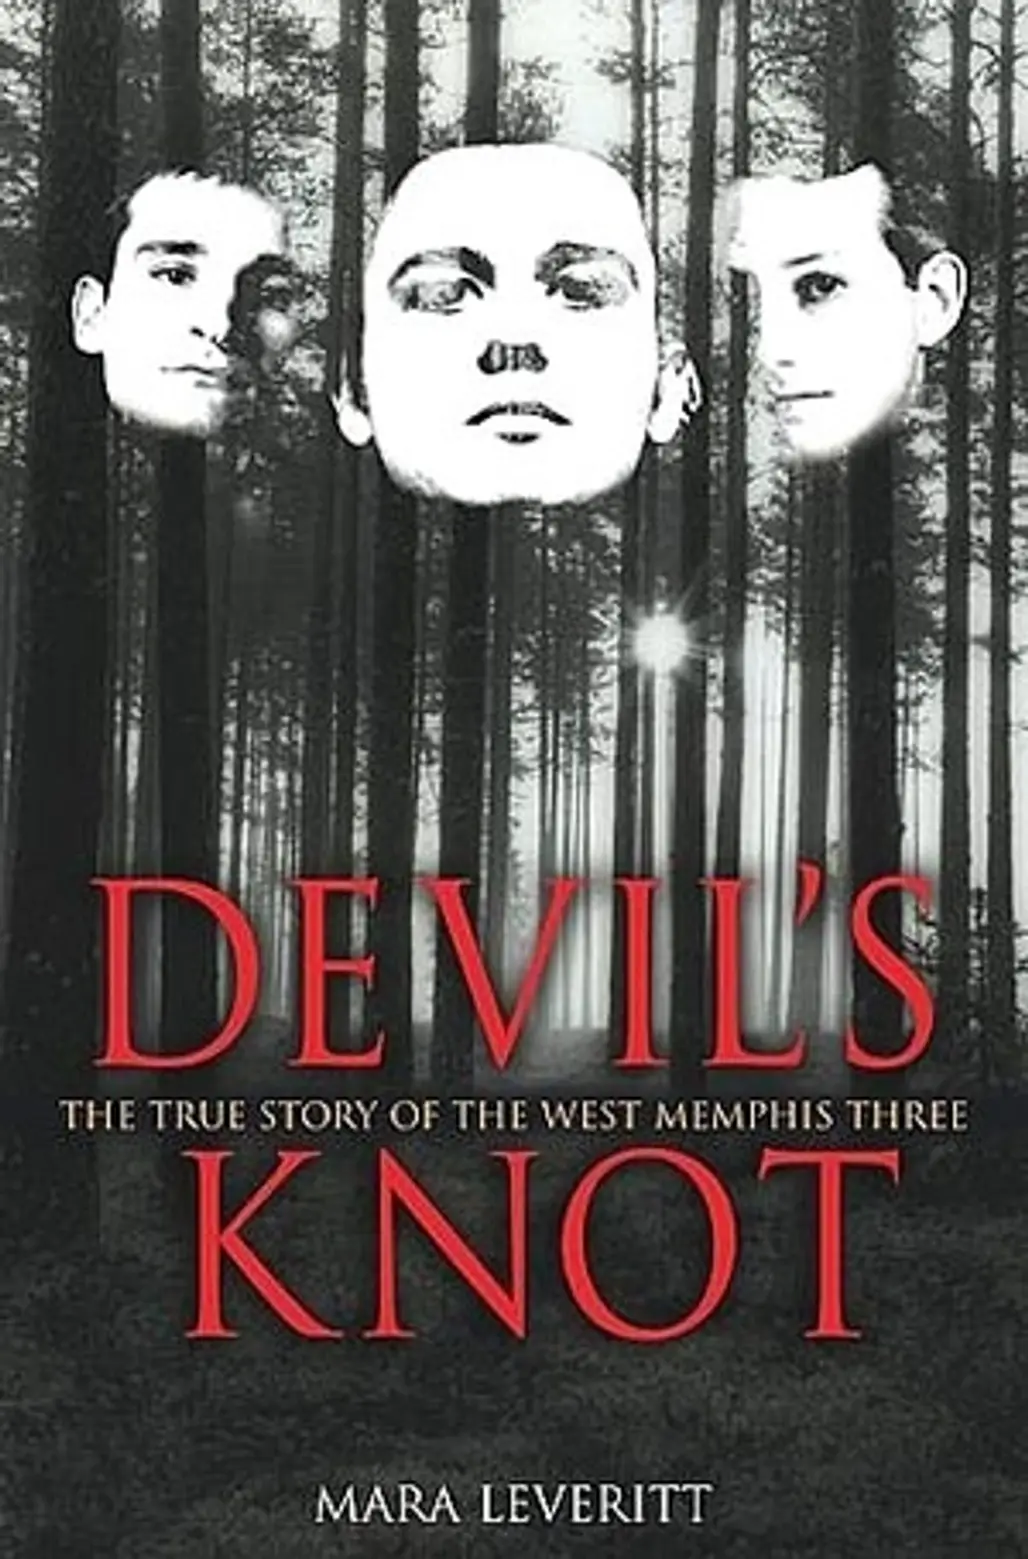 Devil’s Knot: the True Story of the West Memphis Three by Mara Leveritt